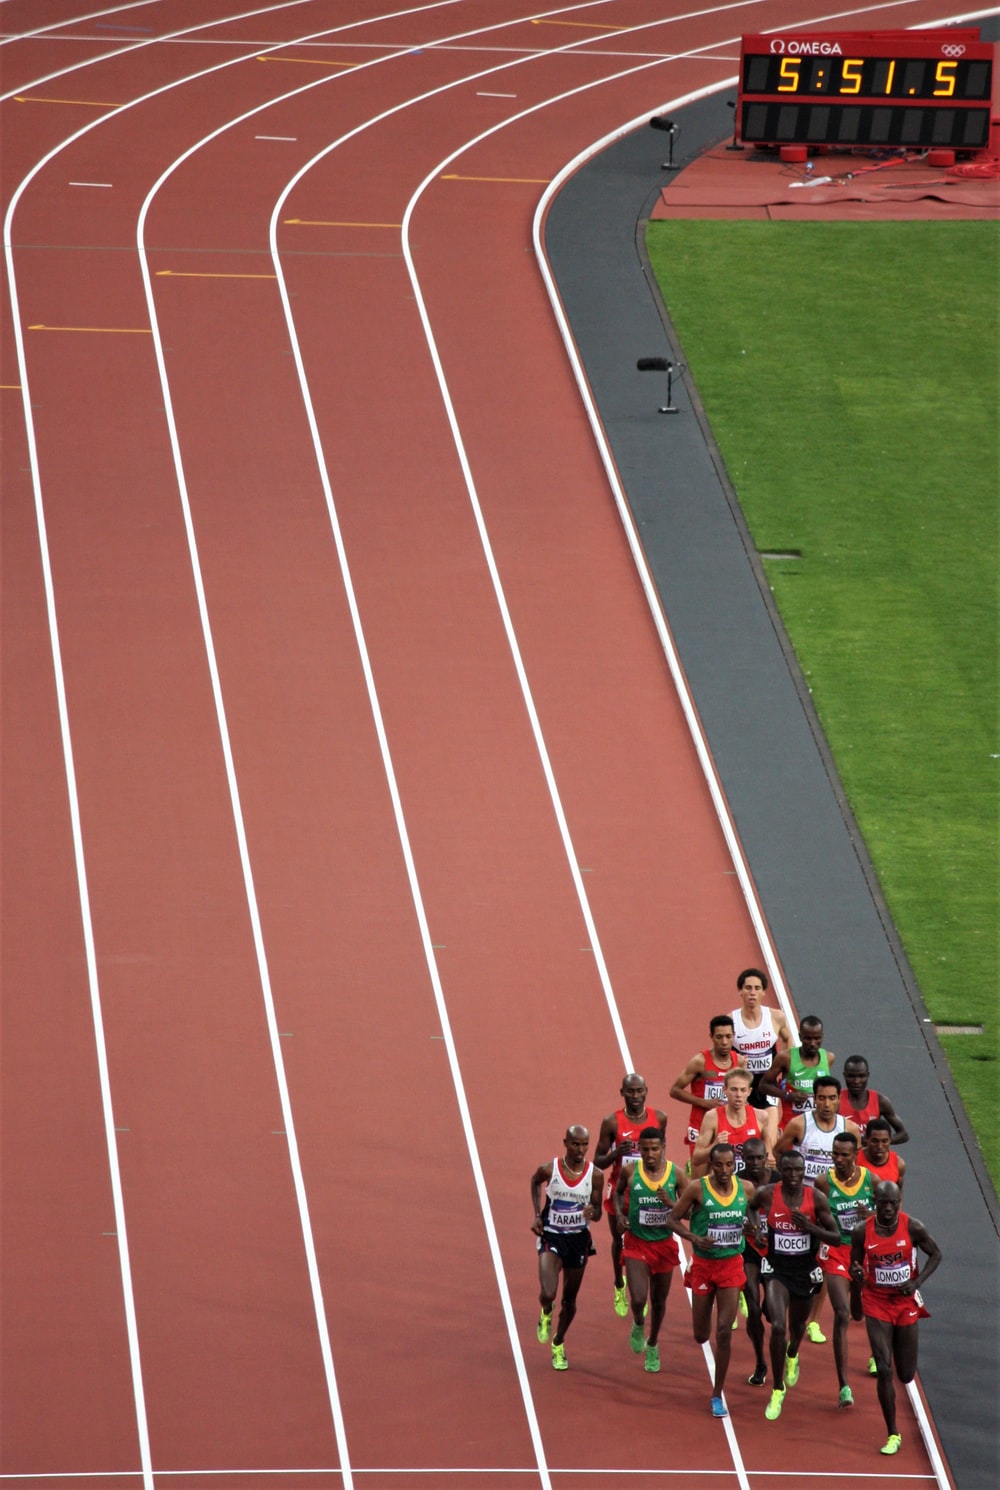 Track And Field Picture. Download Free Image